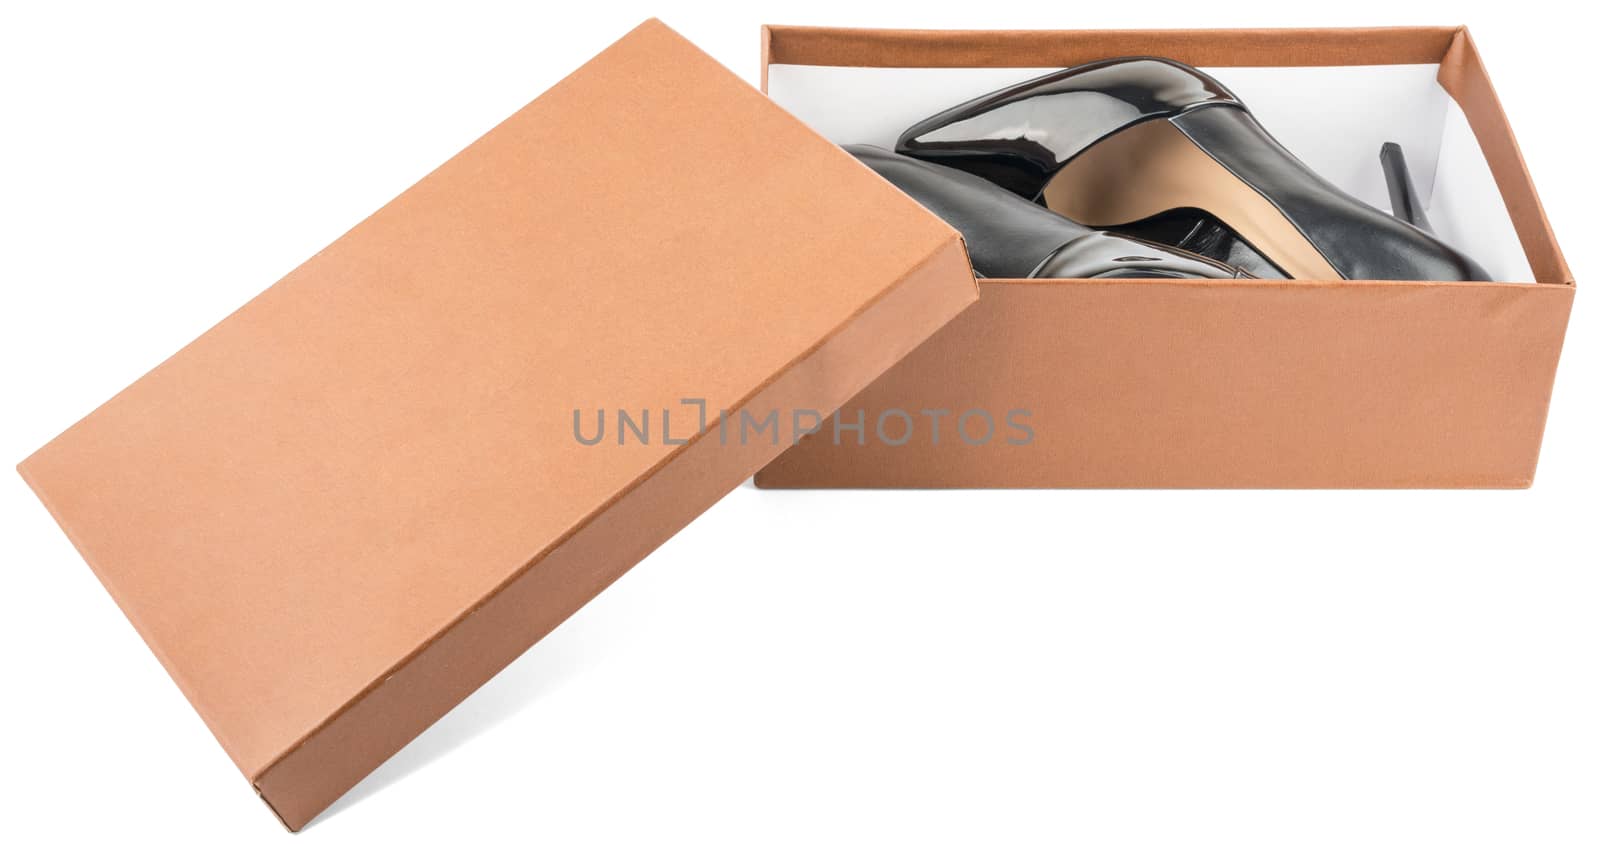 New black leather high heel shoes in box by cherezoff